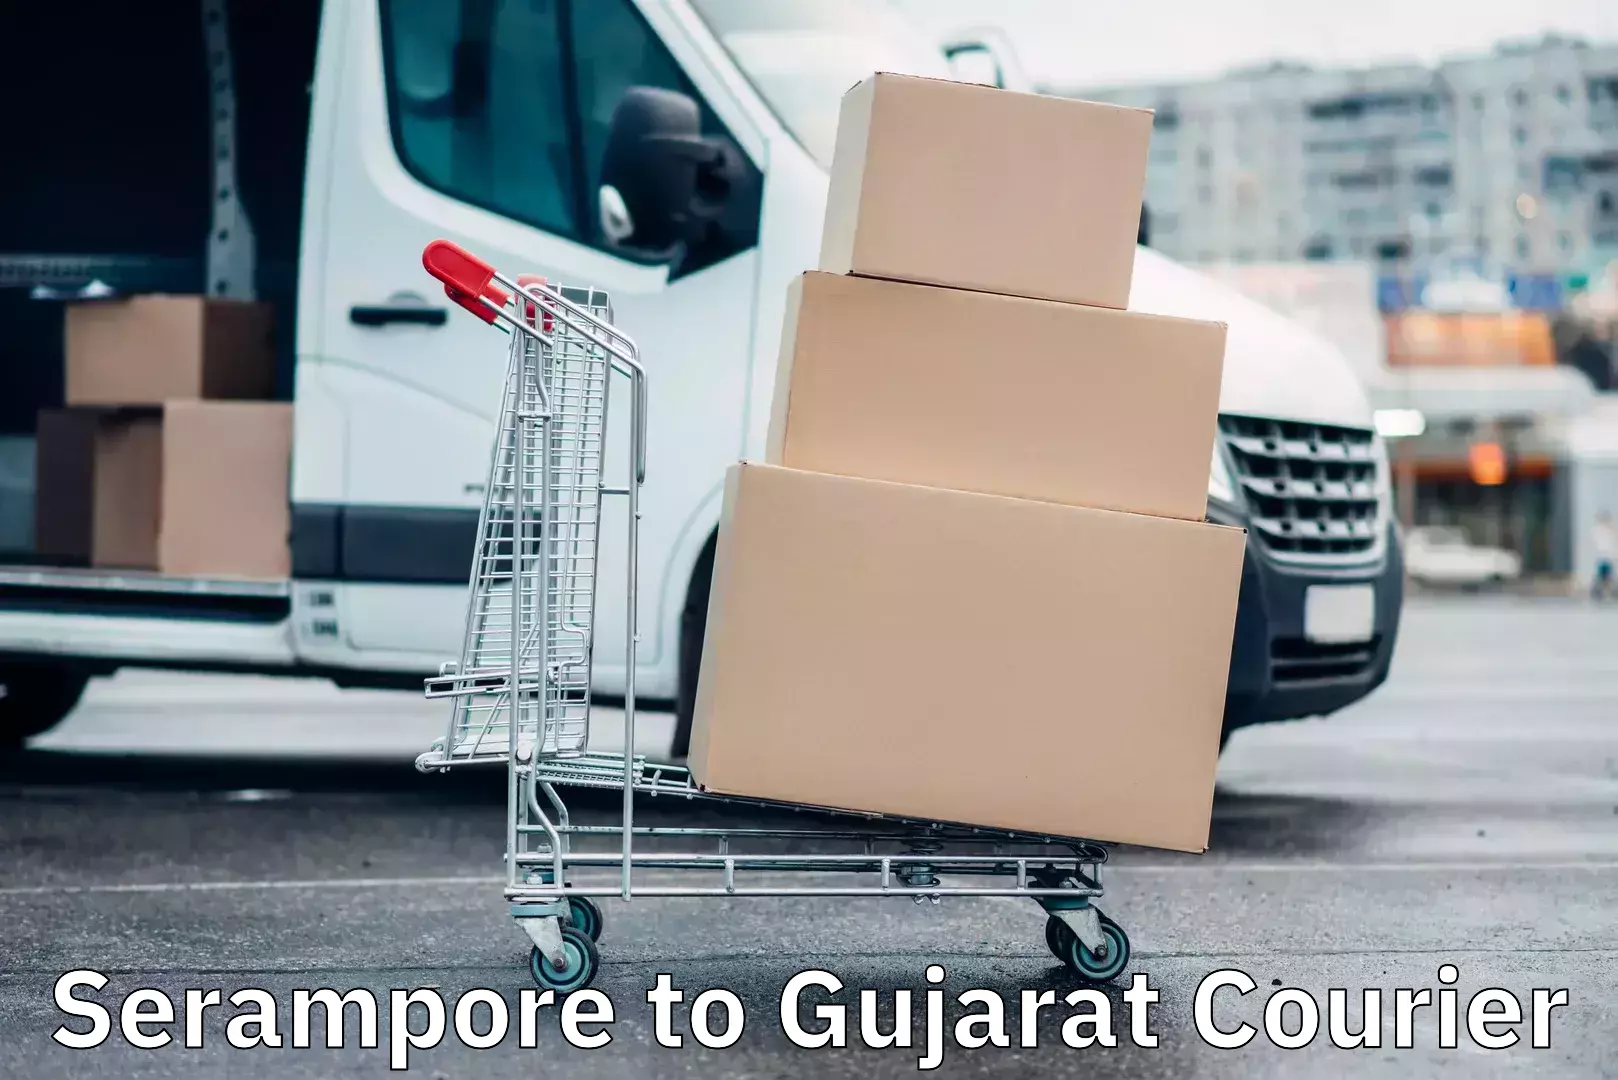 Subscription-based courier Serampore to Gujarat